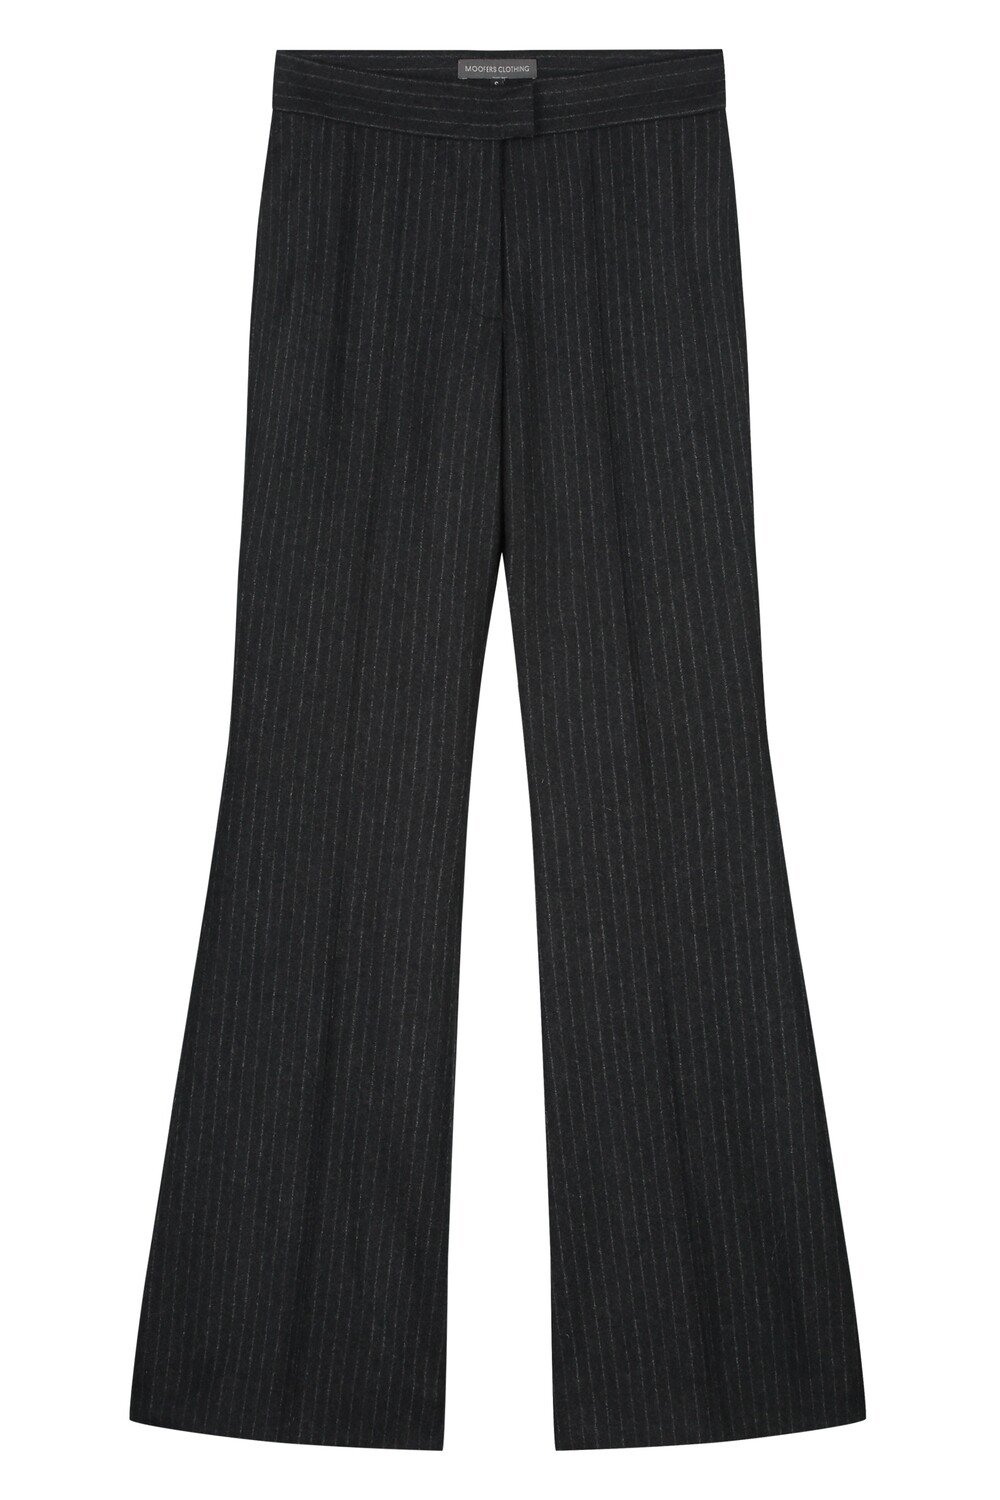 FLANNEL PIN STRIPE TROUSERS IN CHARCOAL